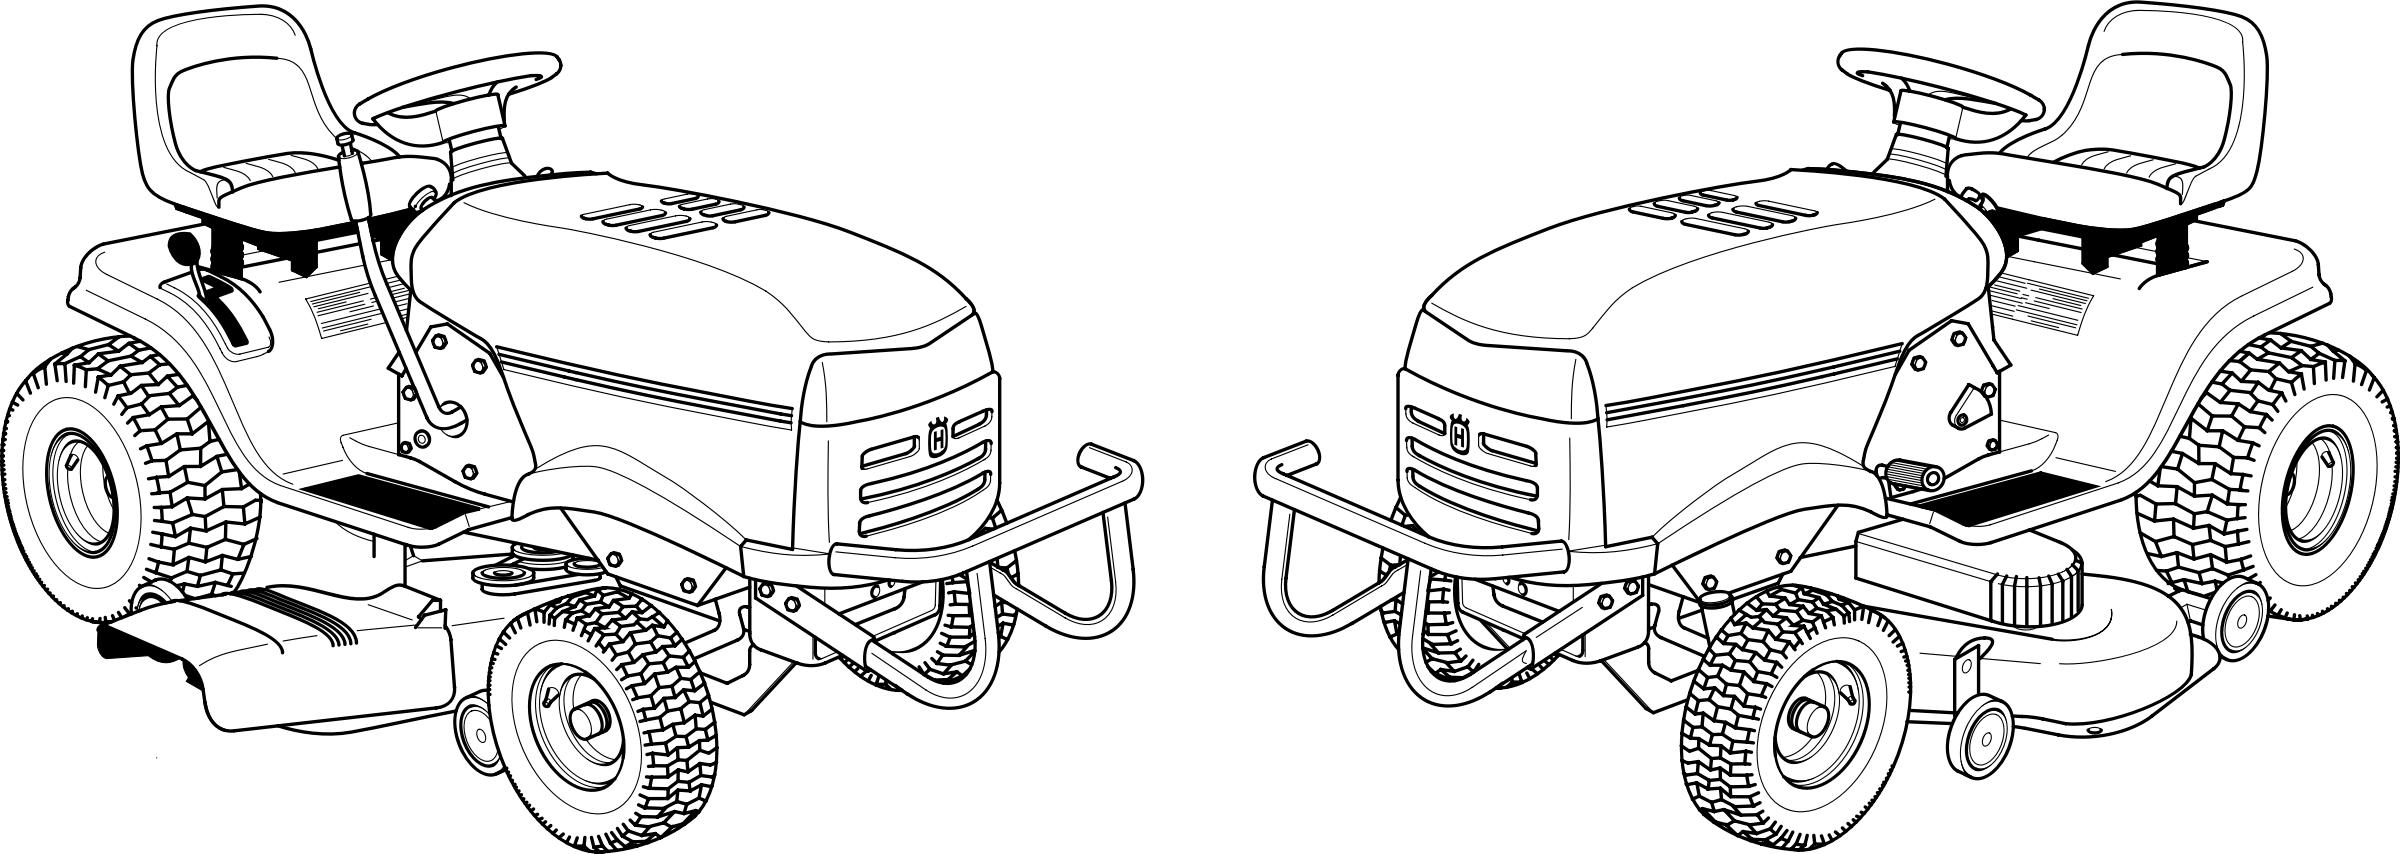 lawn mower png